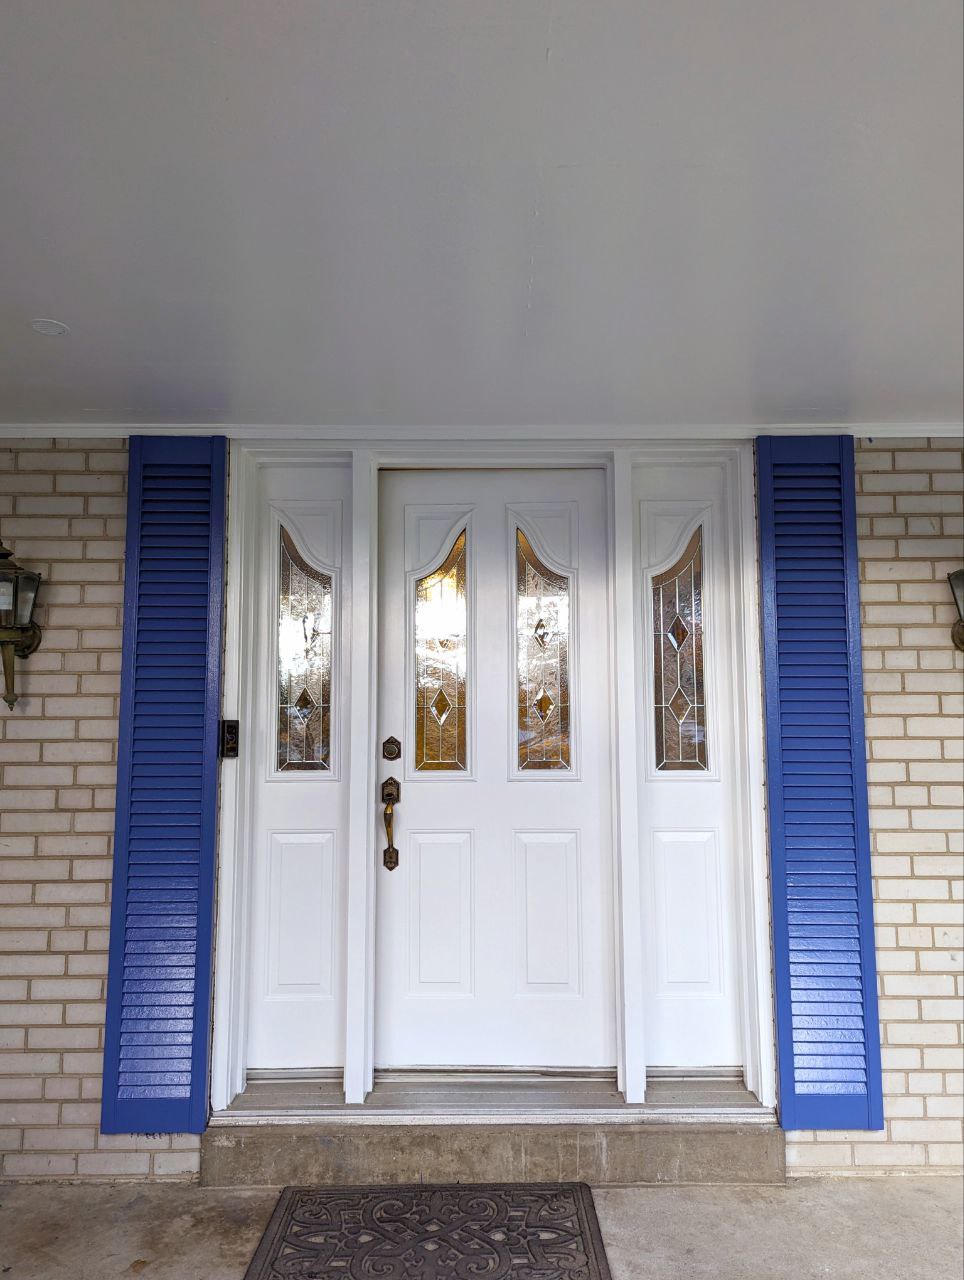 Exterior painting project in North York, Toronto: shutters painted in a nice rich blue by BenjaminMoore and the entrance door freshened up in the existing white colour.